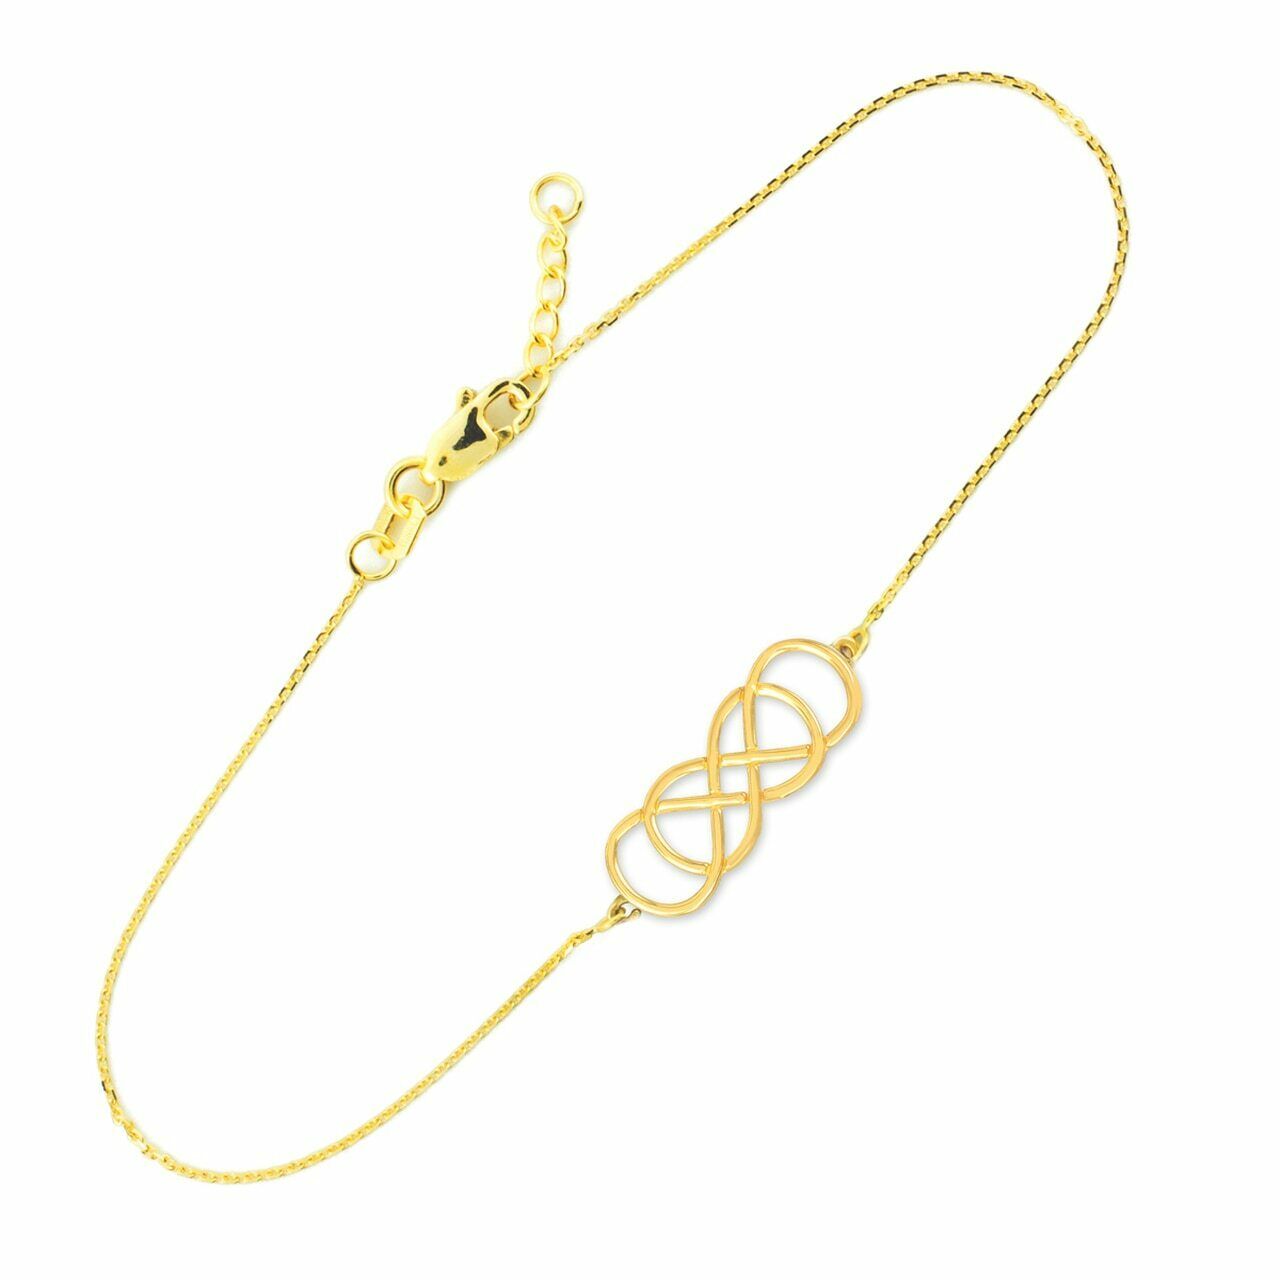 14K Solid Yellow Gold Double Knot Infinity Love Adjustable Bracelet